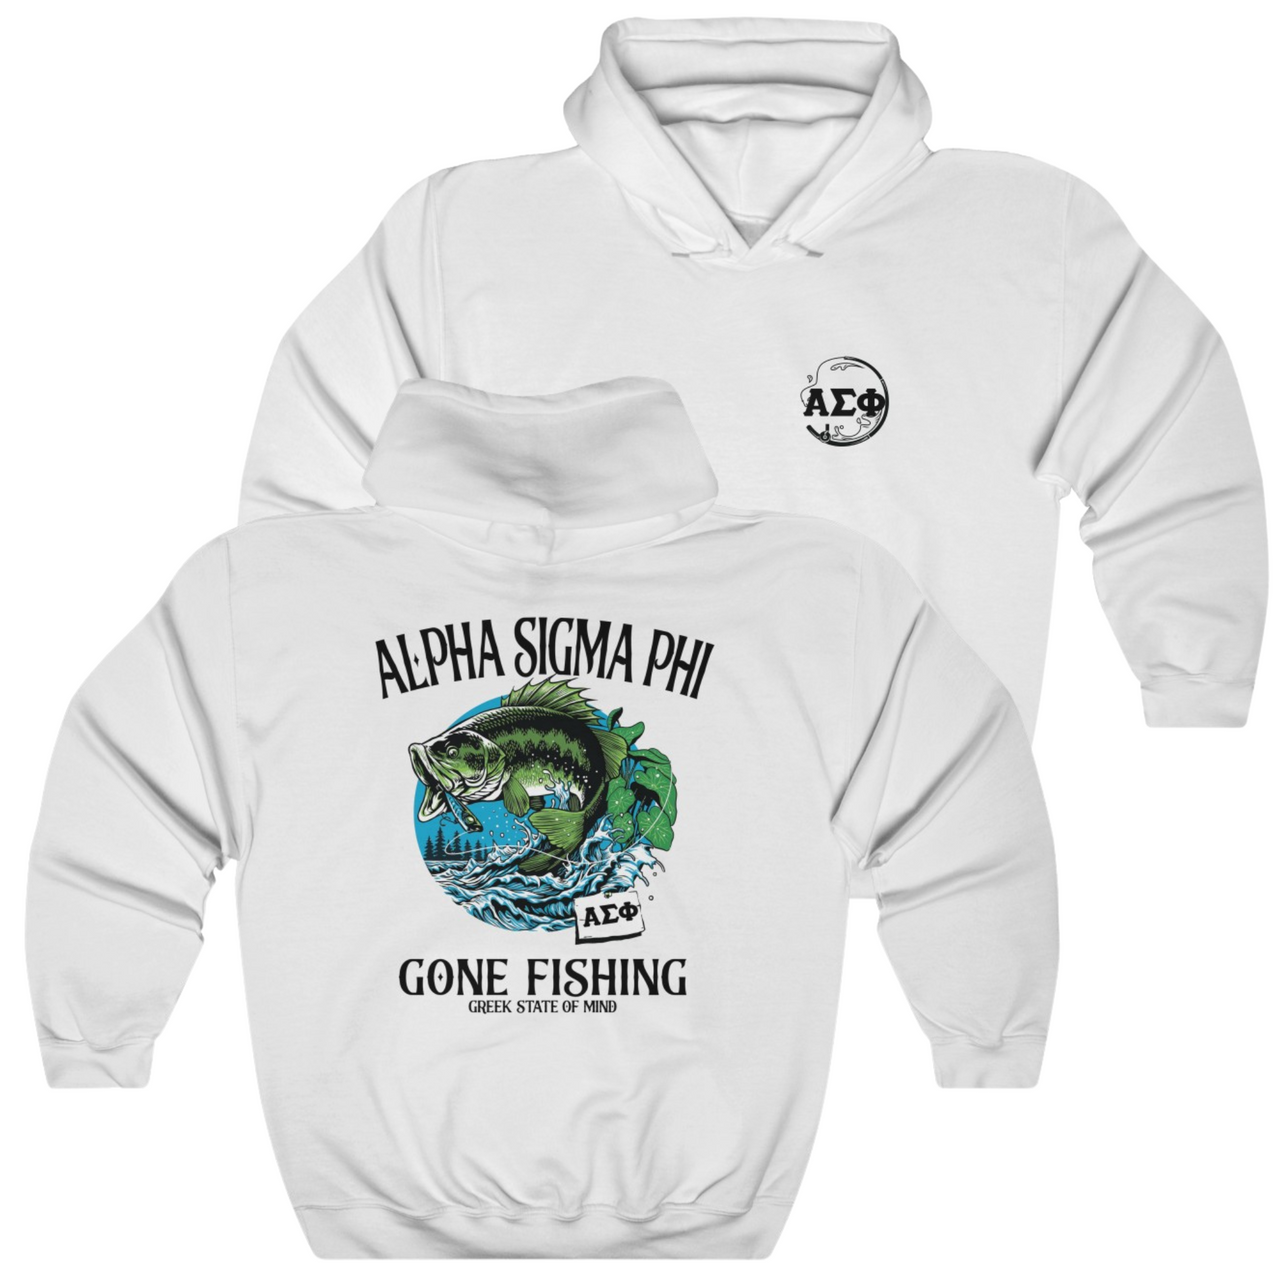 White Alpha Sigma Phi Graphic Hoodie | Gone Fishing | Alpha Sigma Phi Fraternity Shirt